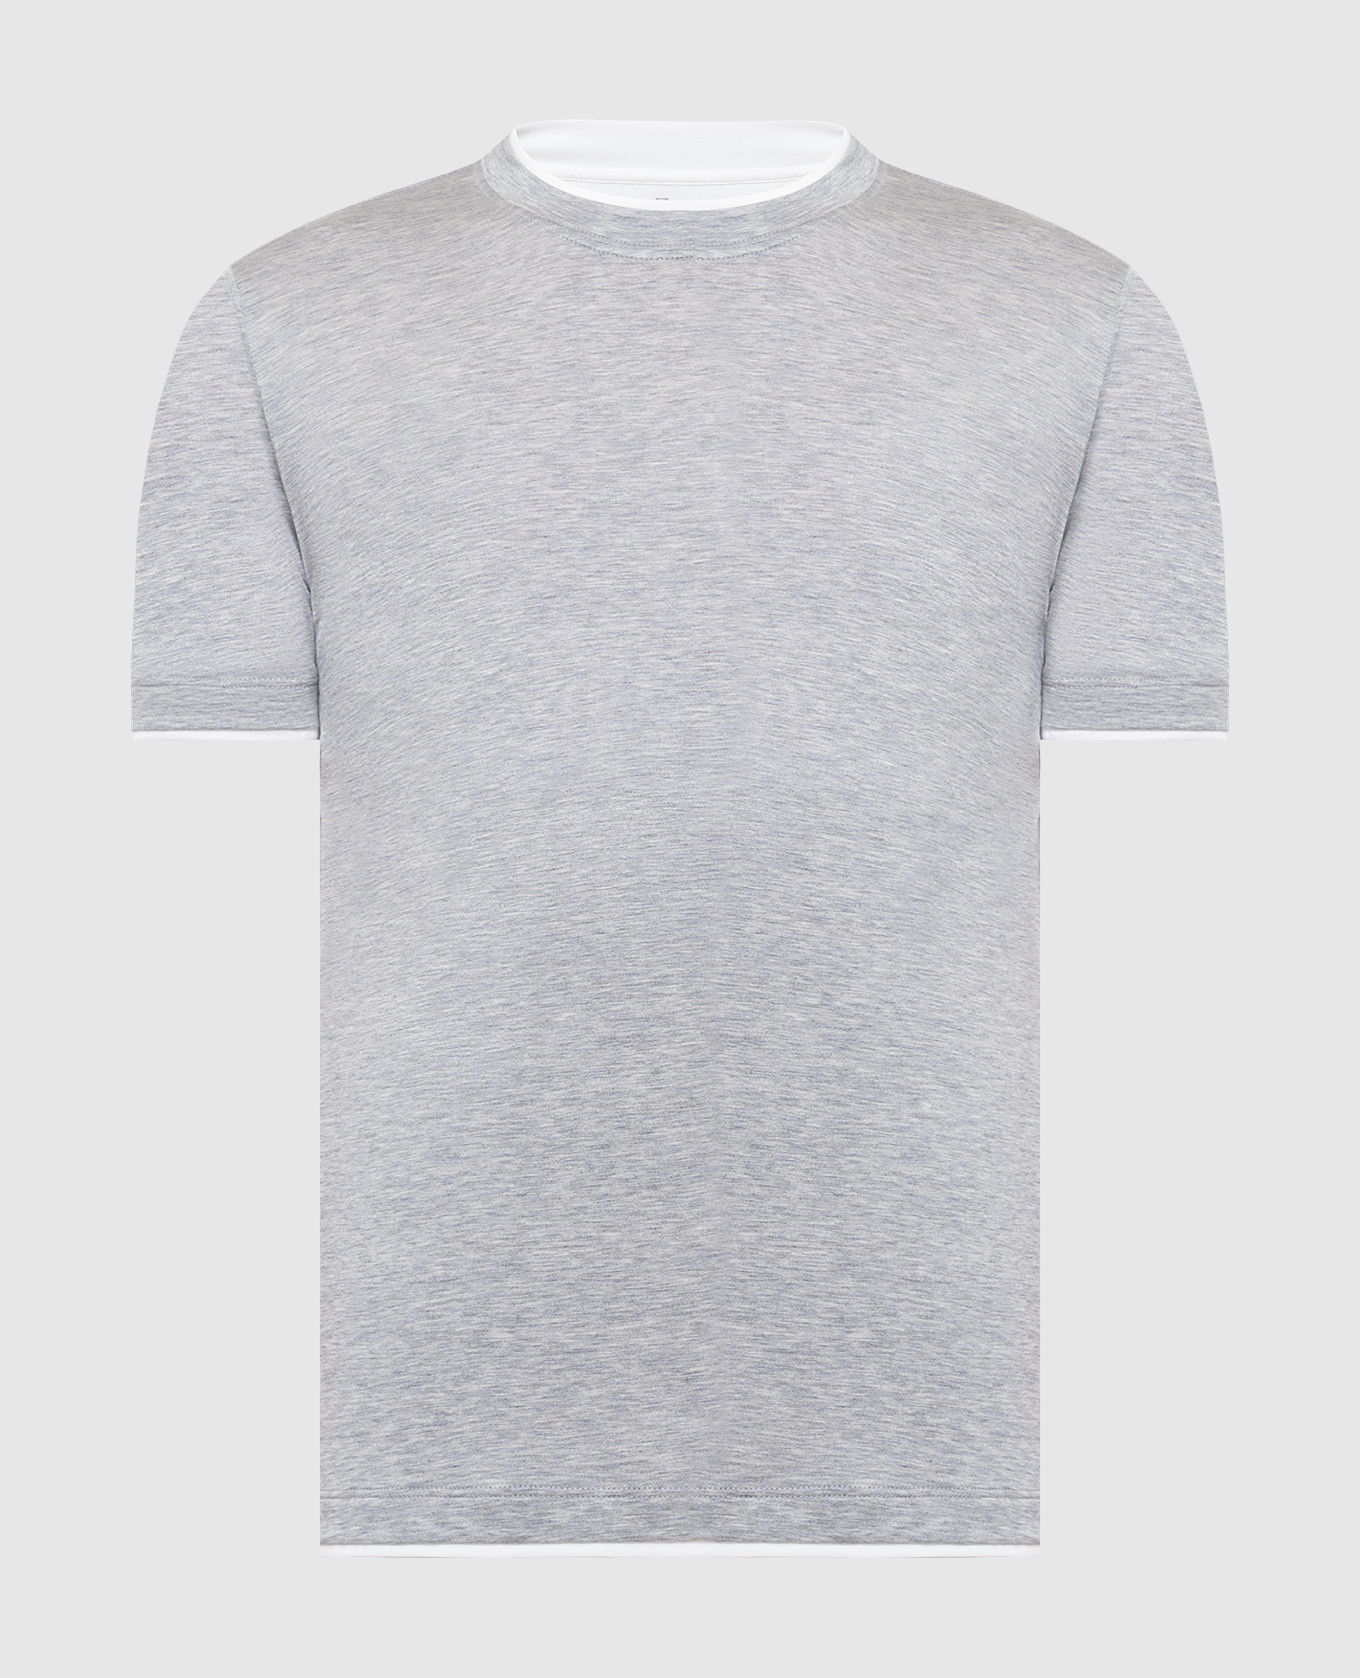 Gray T-shirt with short sleeves